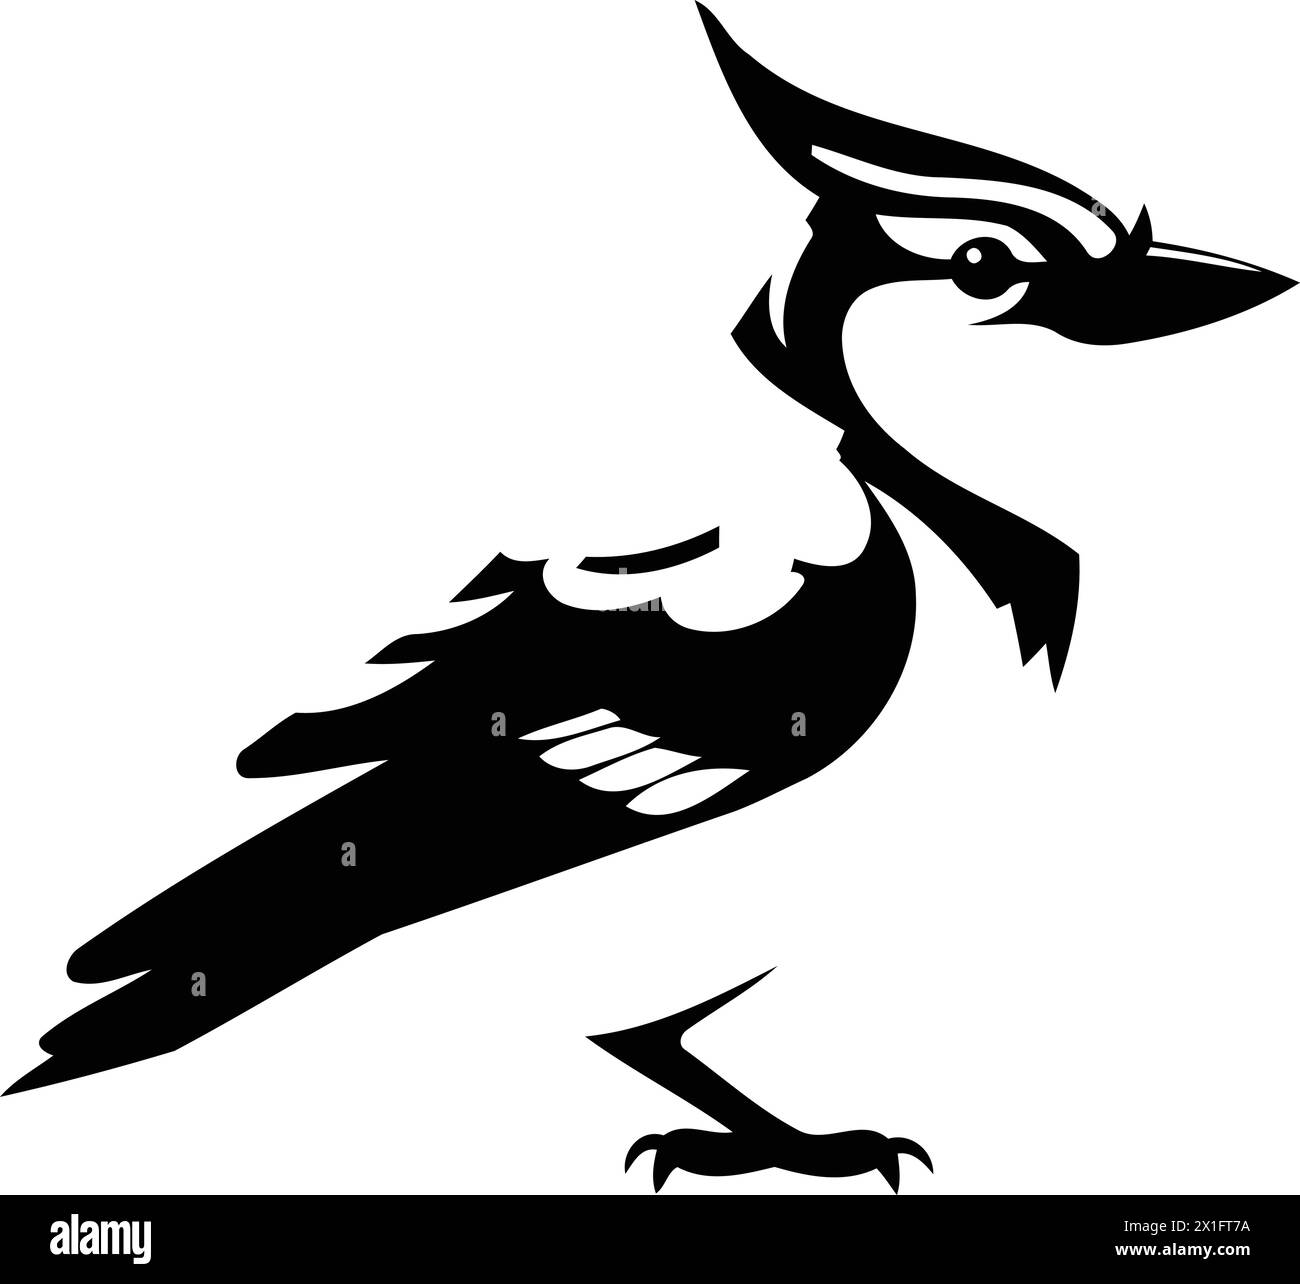 Blue jay bird vector Illustration isolated on a white background. Stock Vector